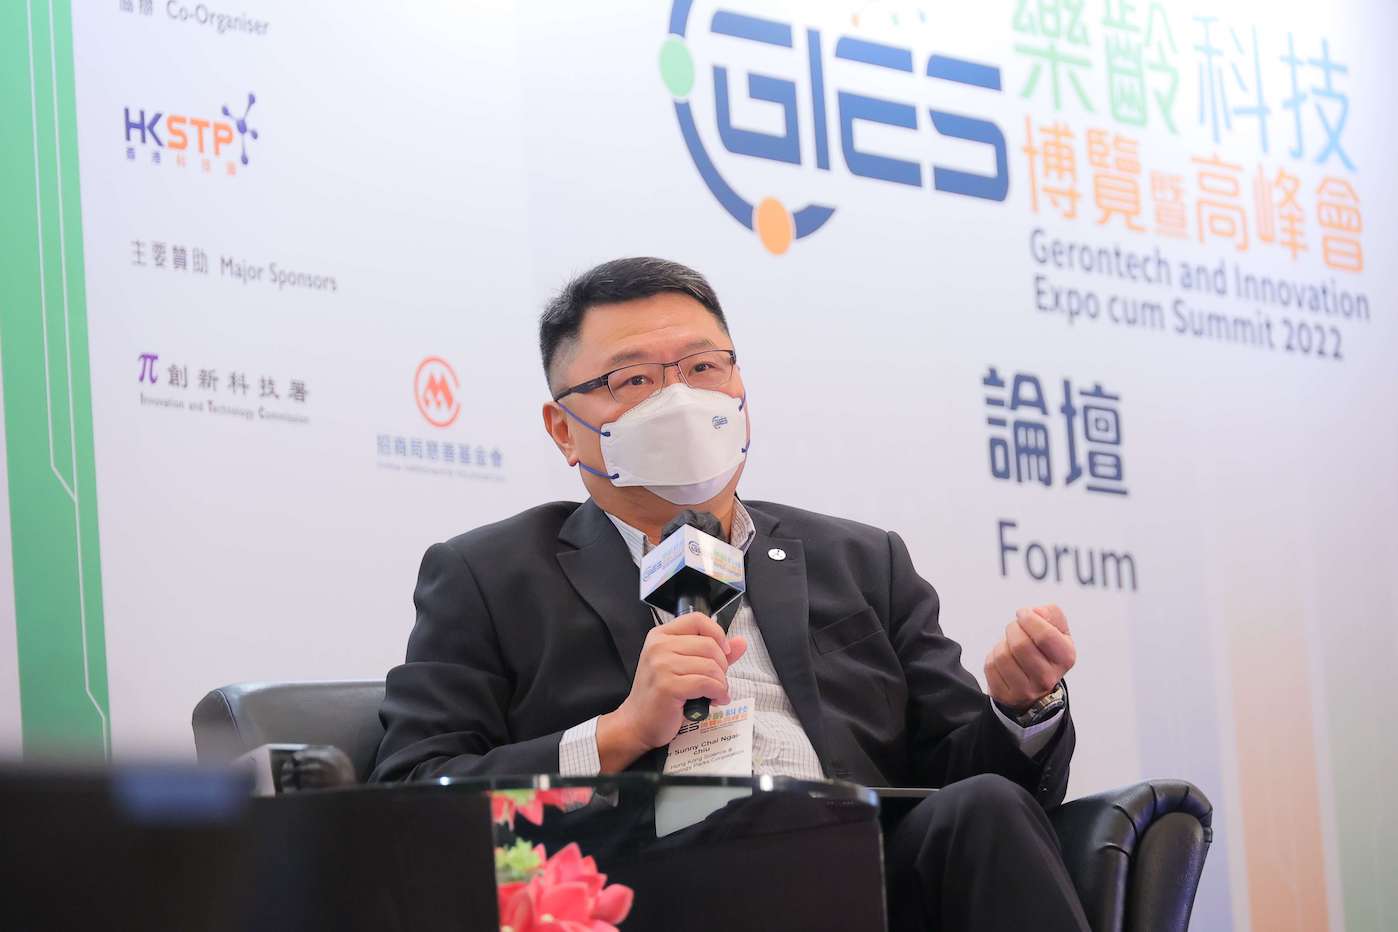 p9tc65725HKSTP JOINS HAND WITH GOVERNMENT AND HKCSS AT GERONTECH AND INNOVATION EXPO CUM SUMMIT 2022